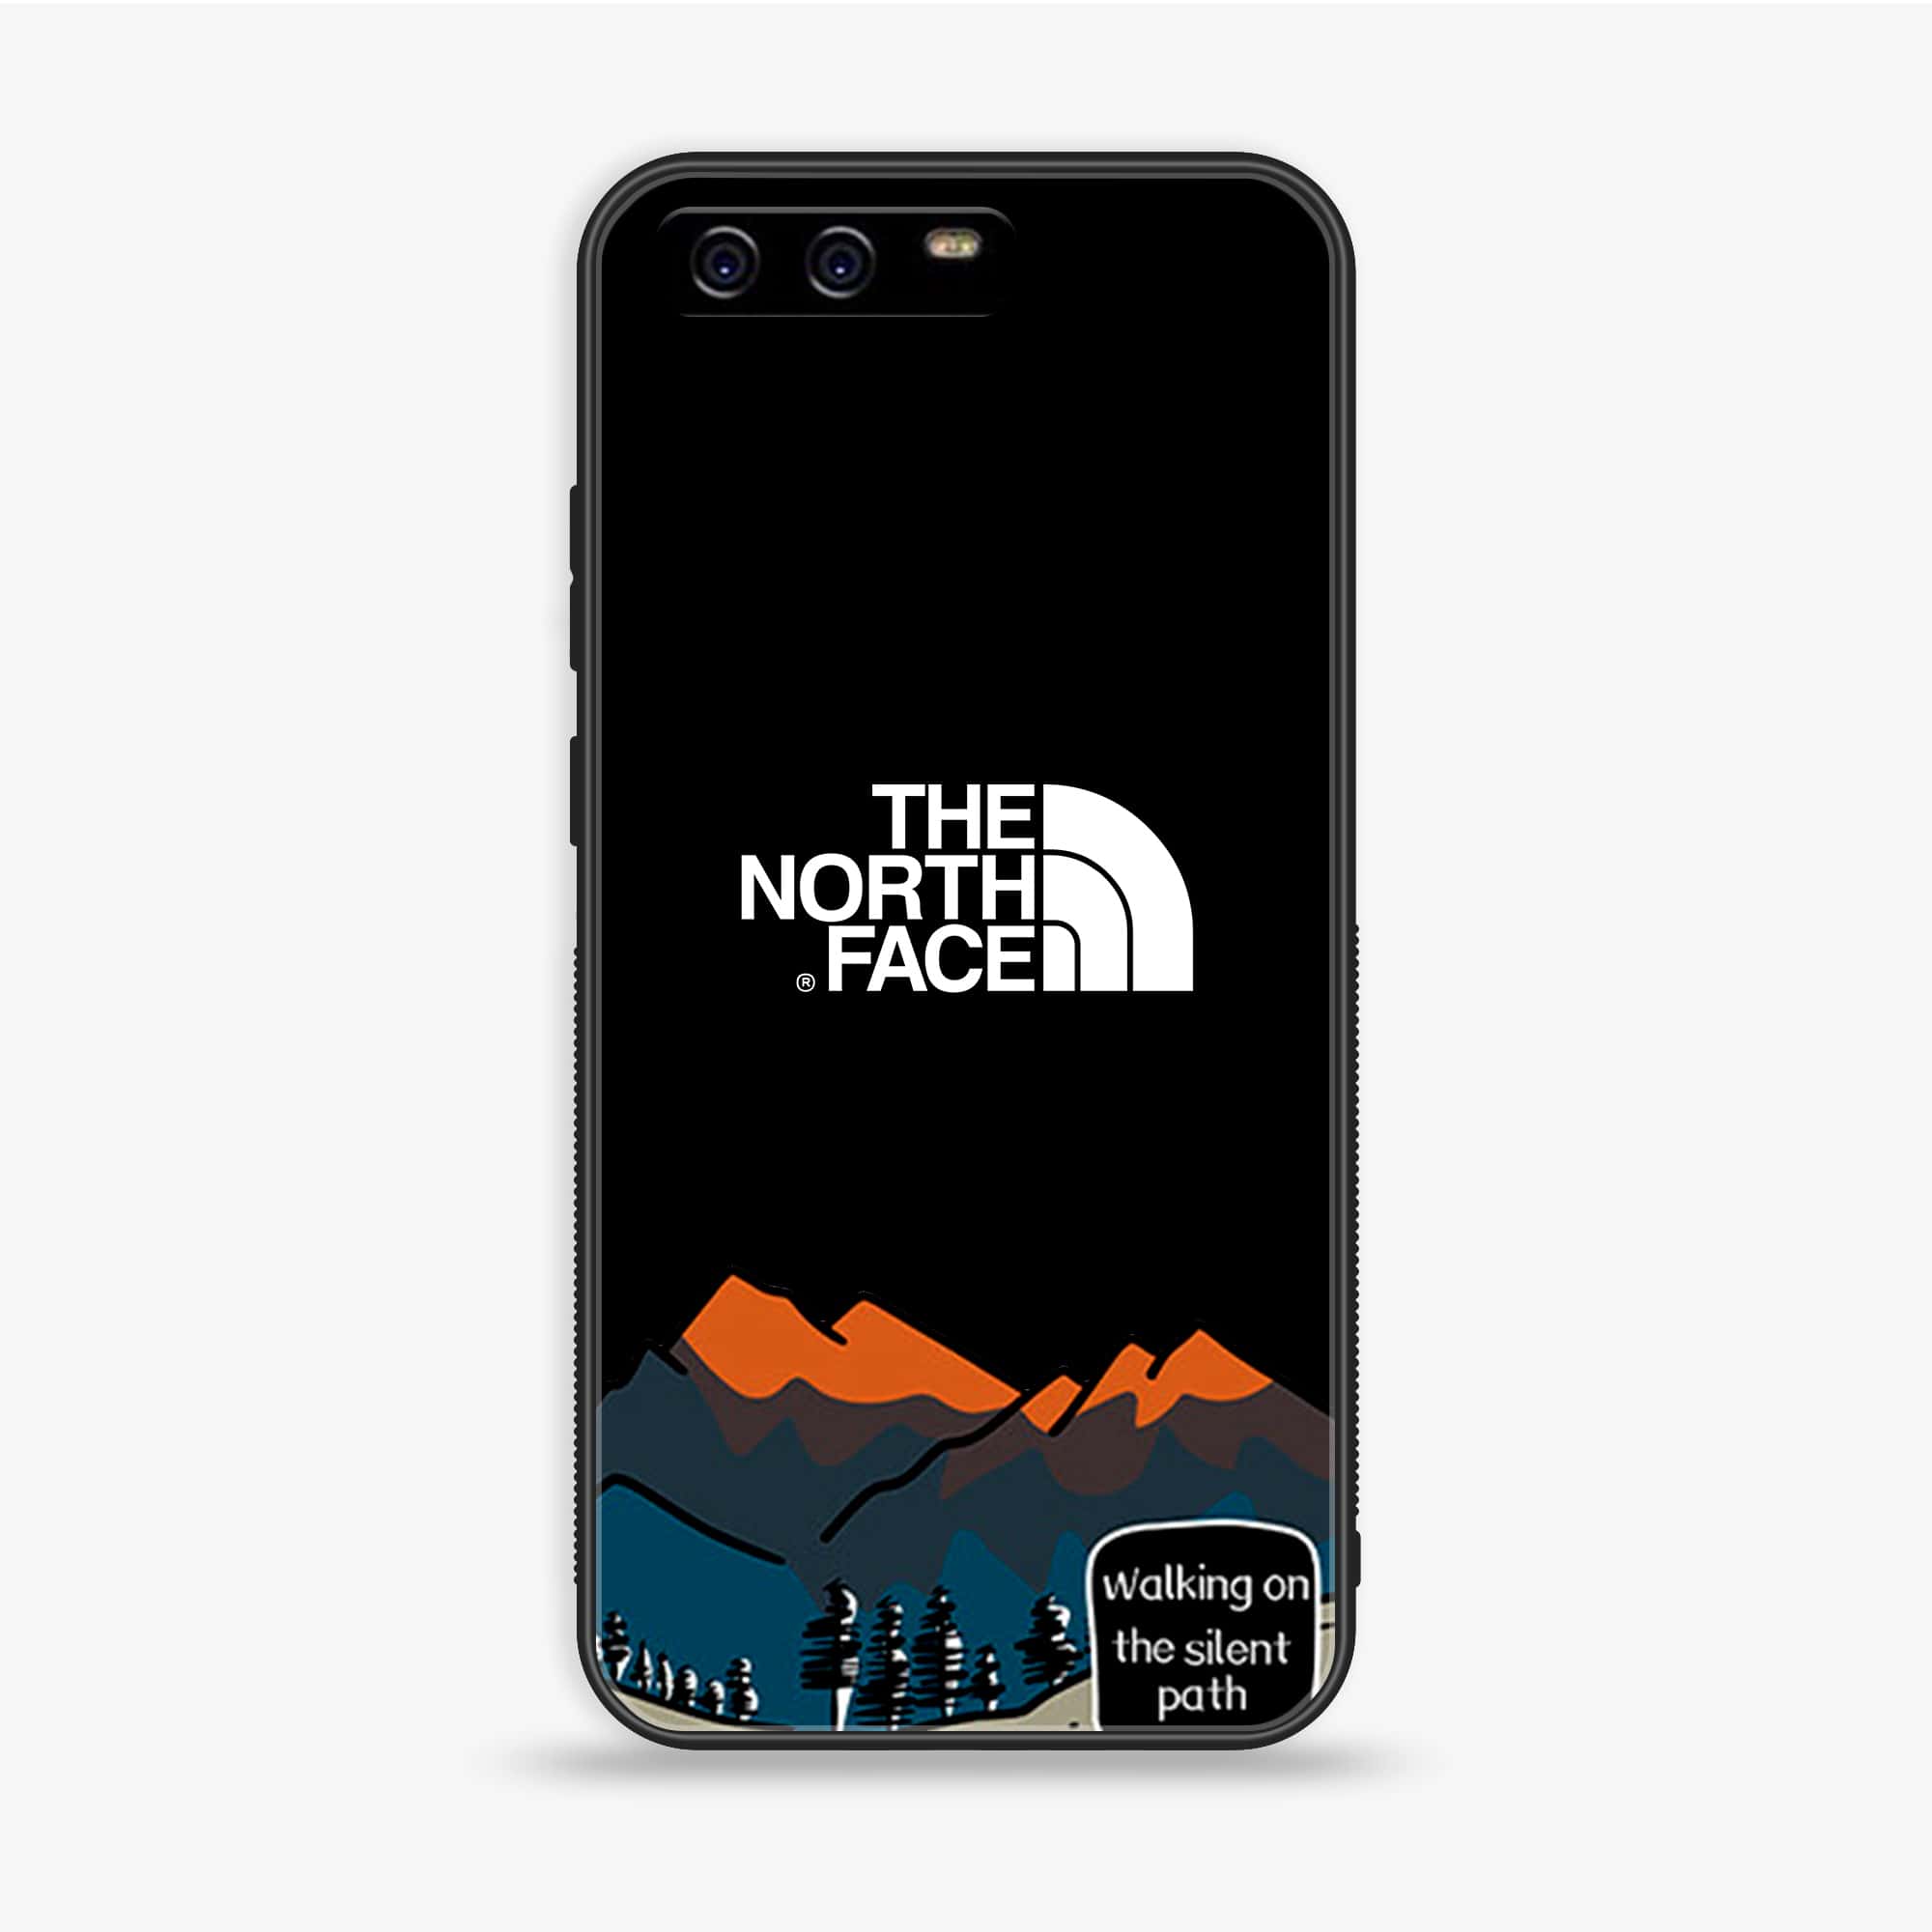 Huawei P10 - The North Face Series Series - Premium Printed Glass soft Bumper shock Proof Case